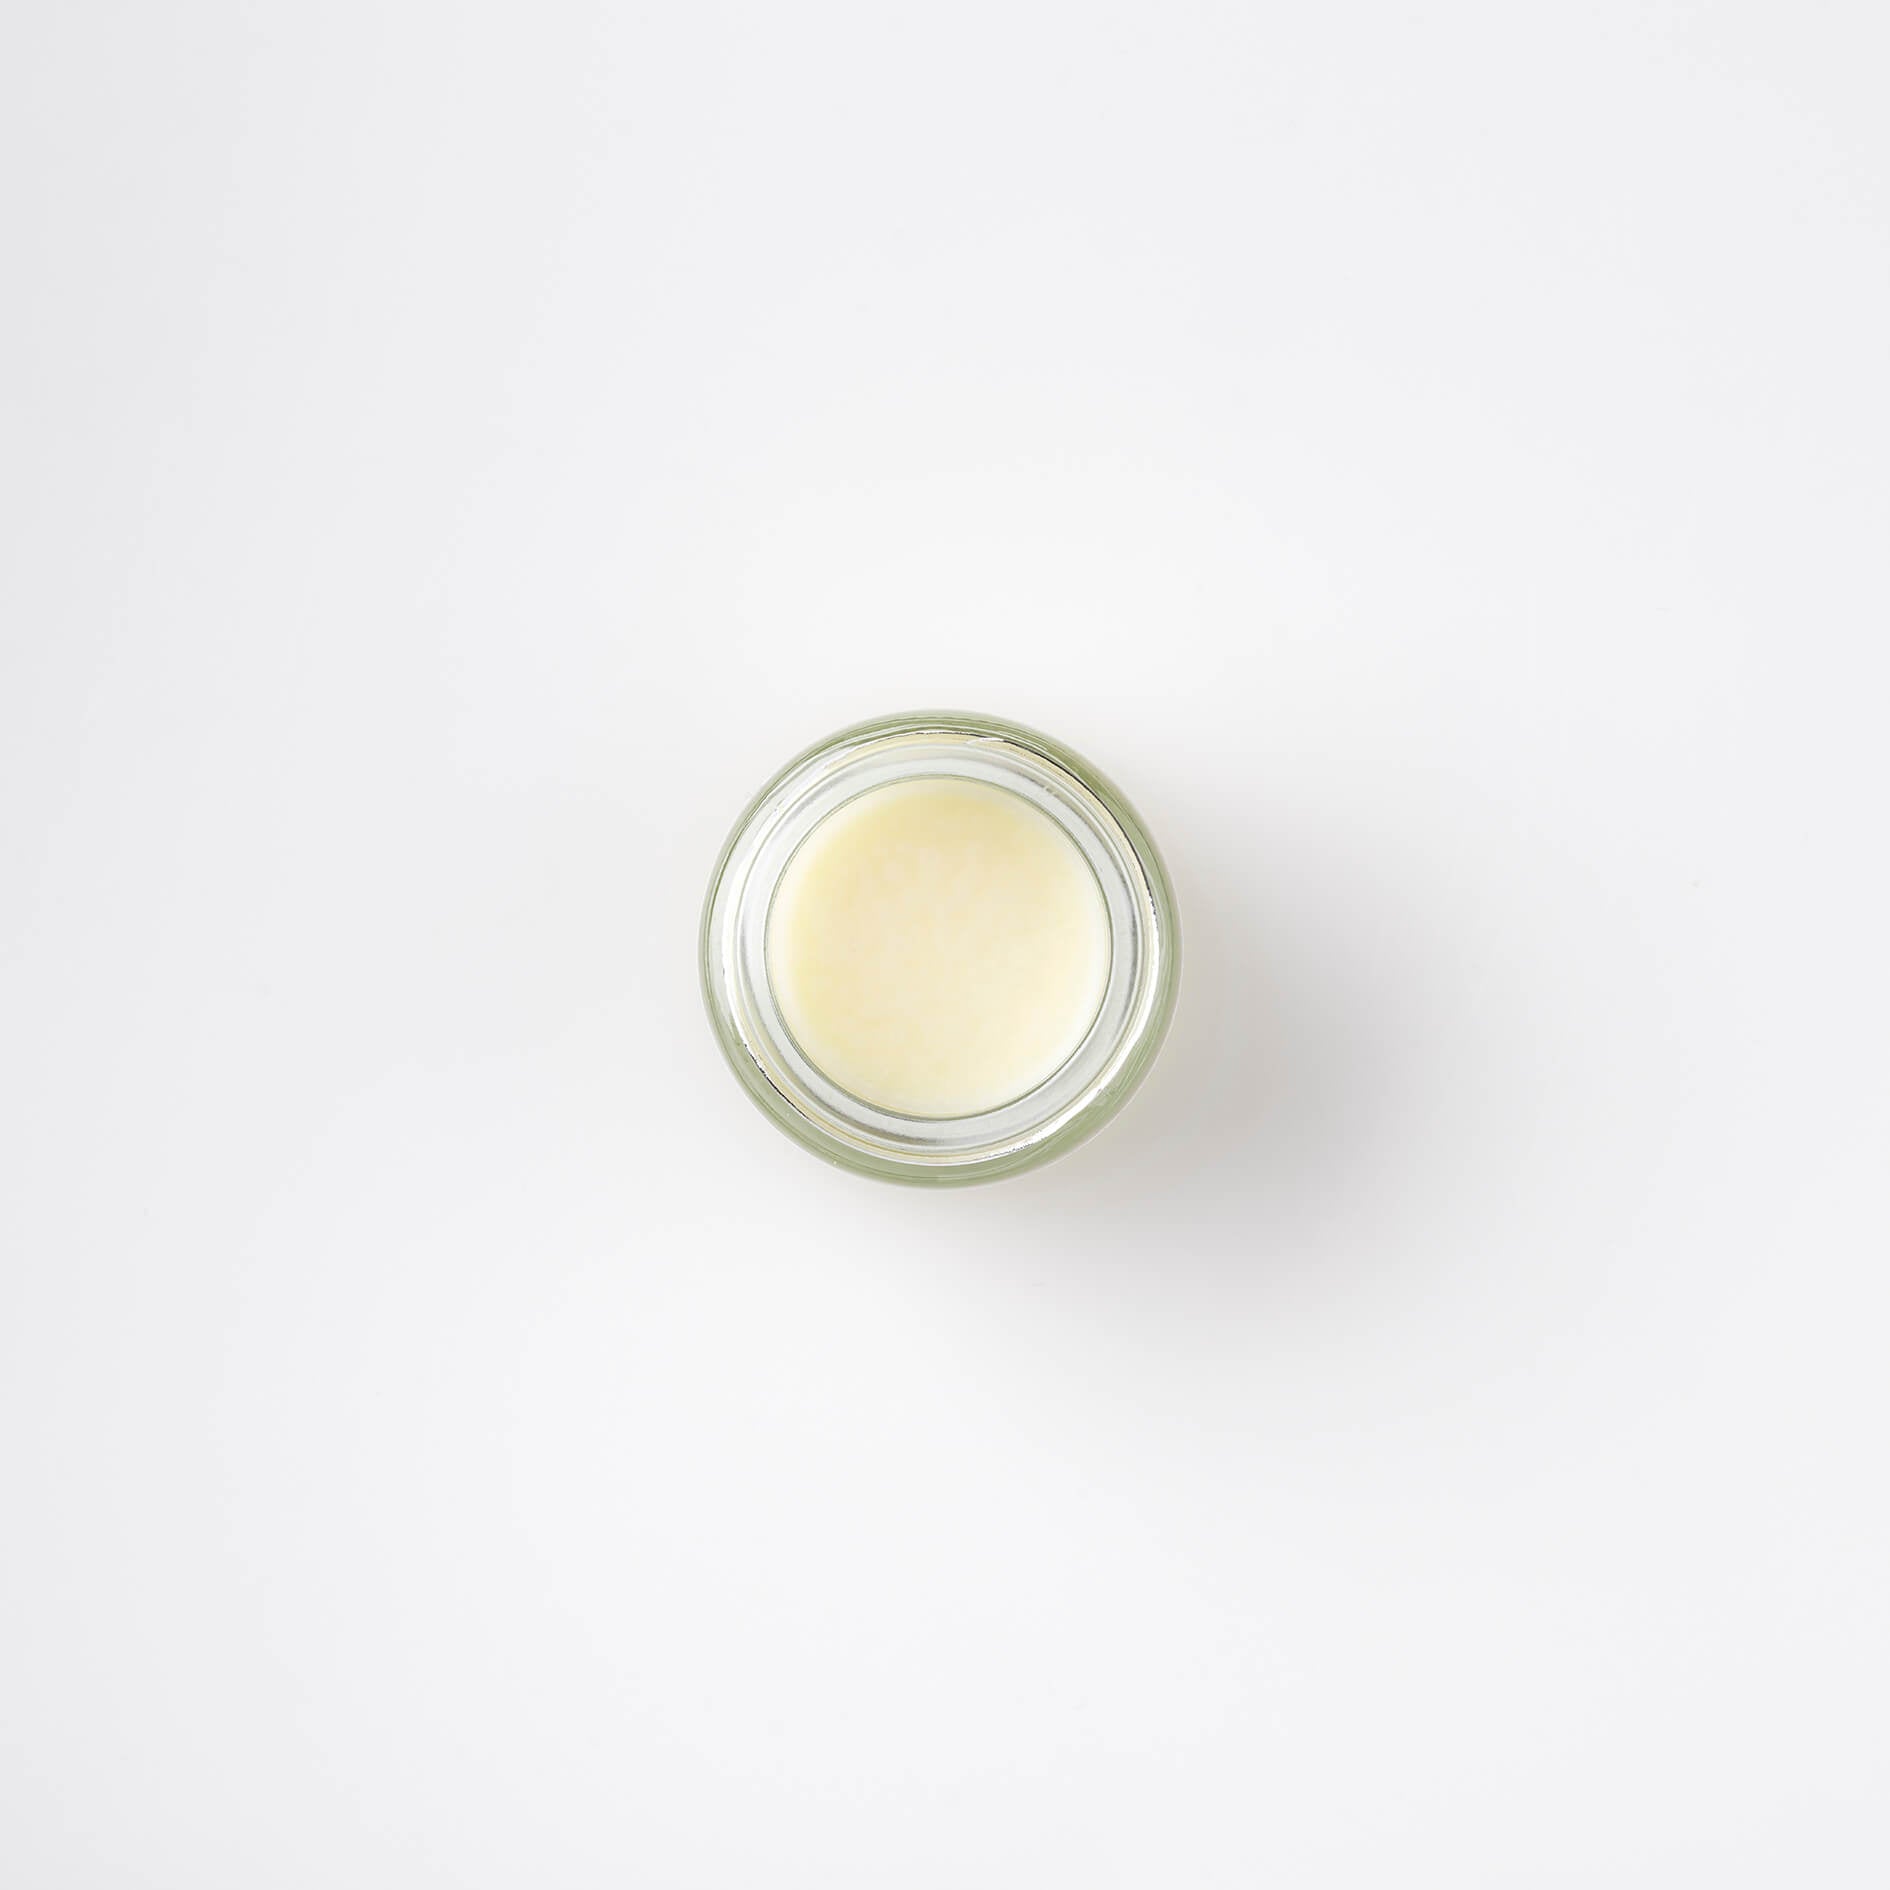 image of the top of a Bristolmade lip balm, showing the smooth, glossy, off white product in a sustainable clear glass jar.